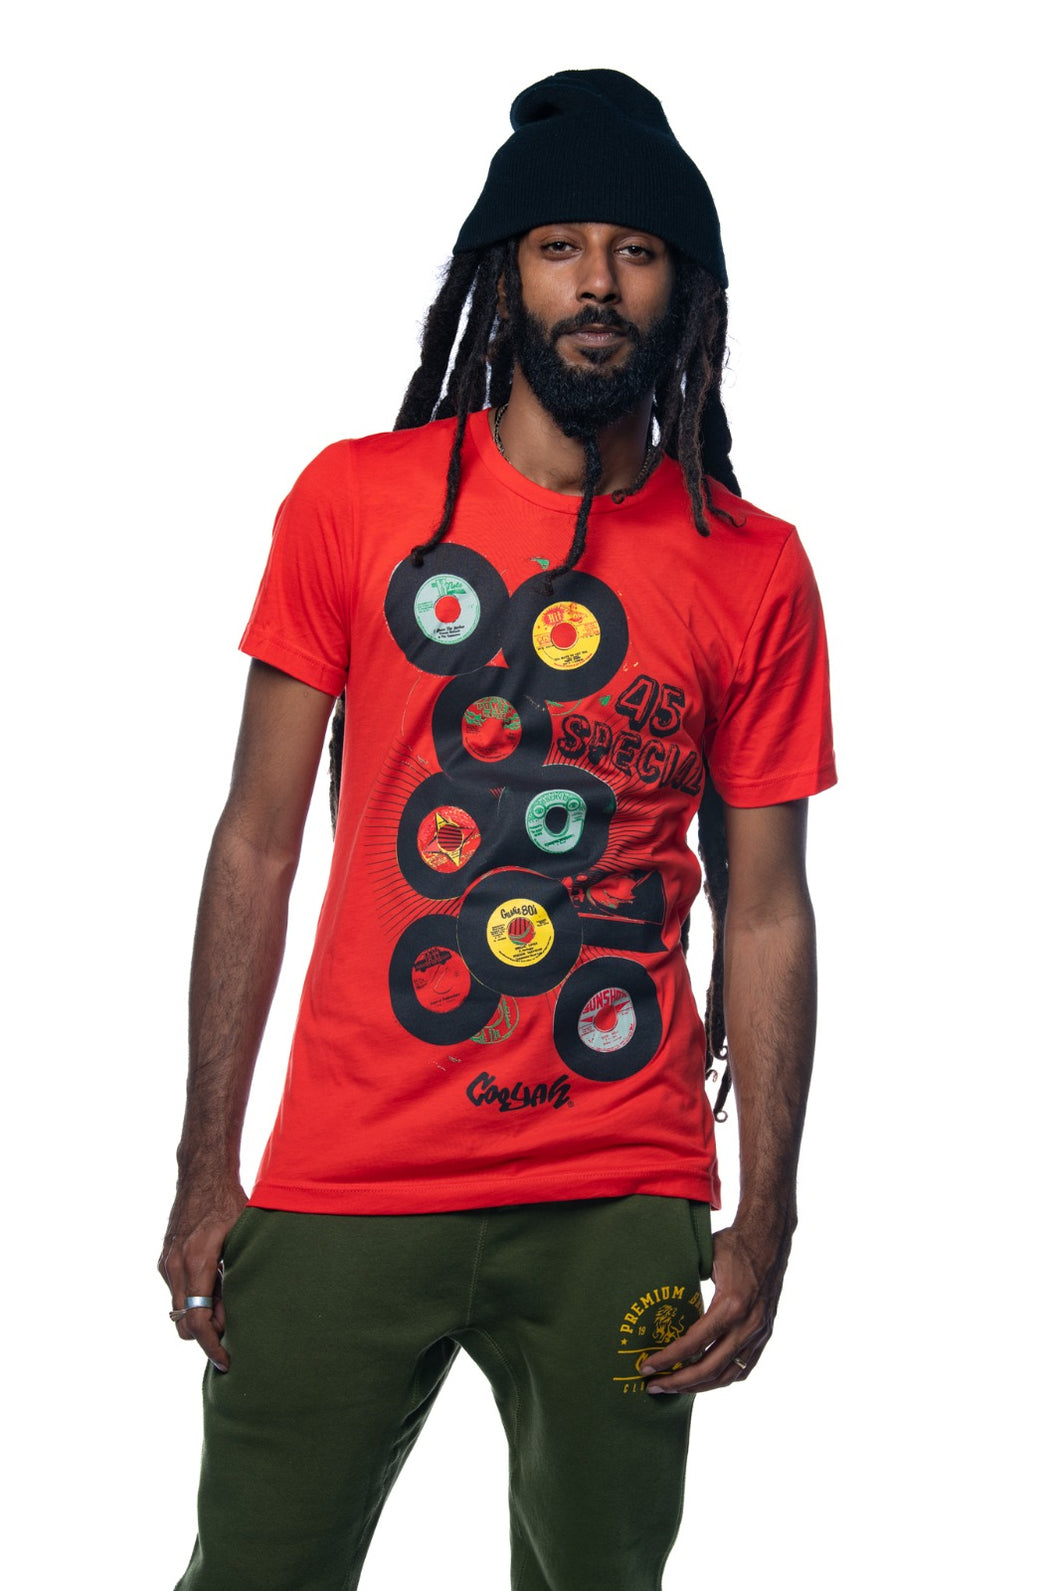 Cooyah Jamaica. Men 's short sleeve graphic tee with 45 RPM Vinyl records screen printed on the front. Vintage reggae and rocksteady style.  Red Shirt, short sleeve, ringspun cotton. Jamaican streetwear clothing brand. IRIE